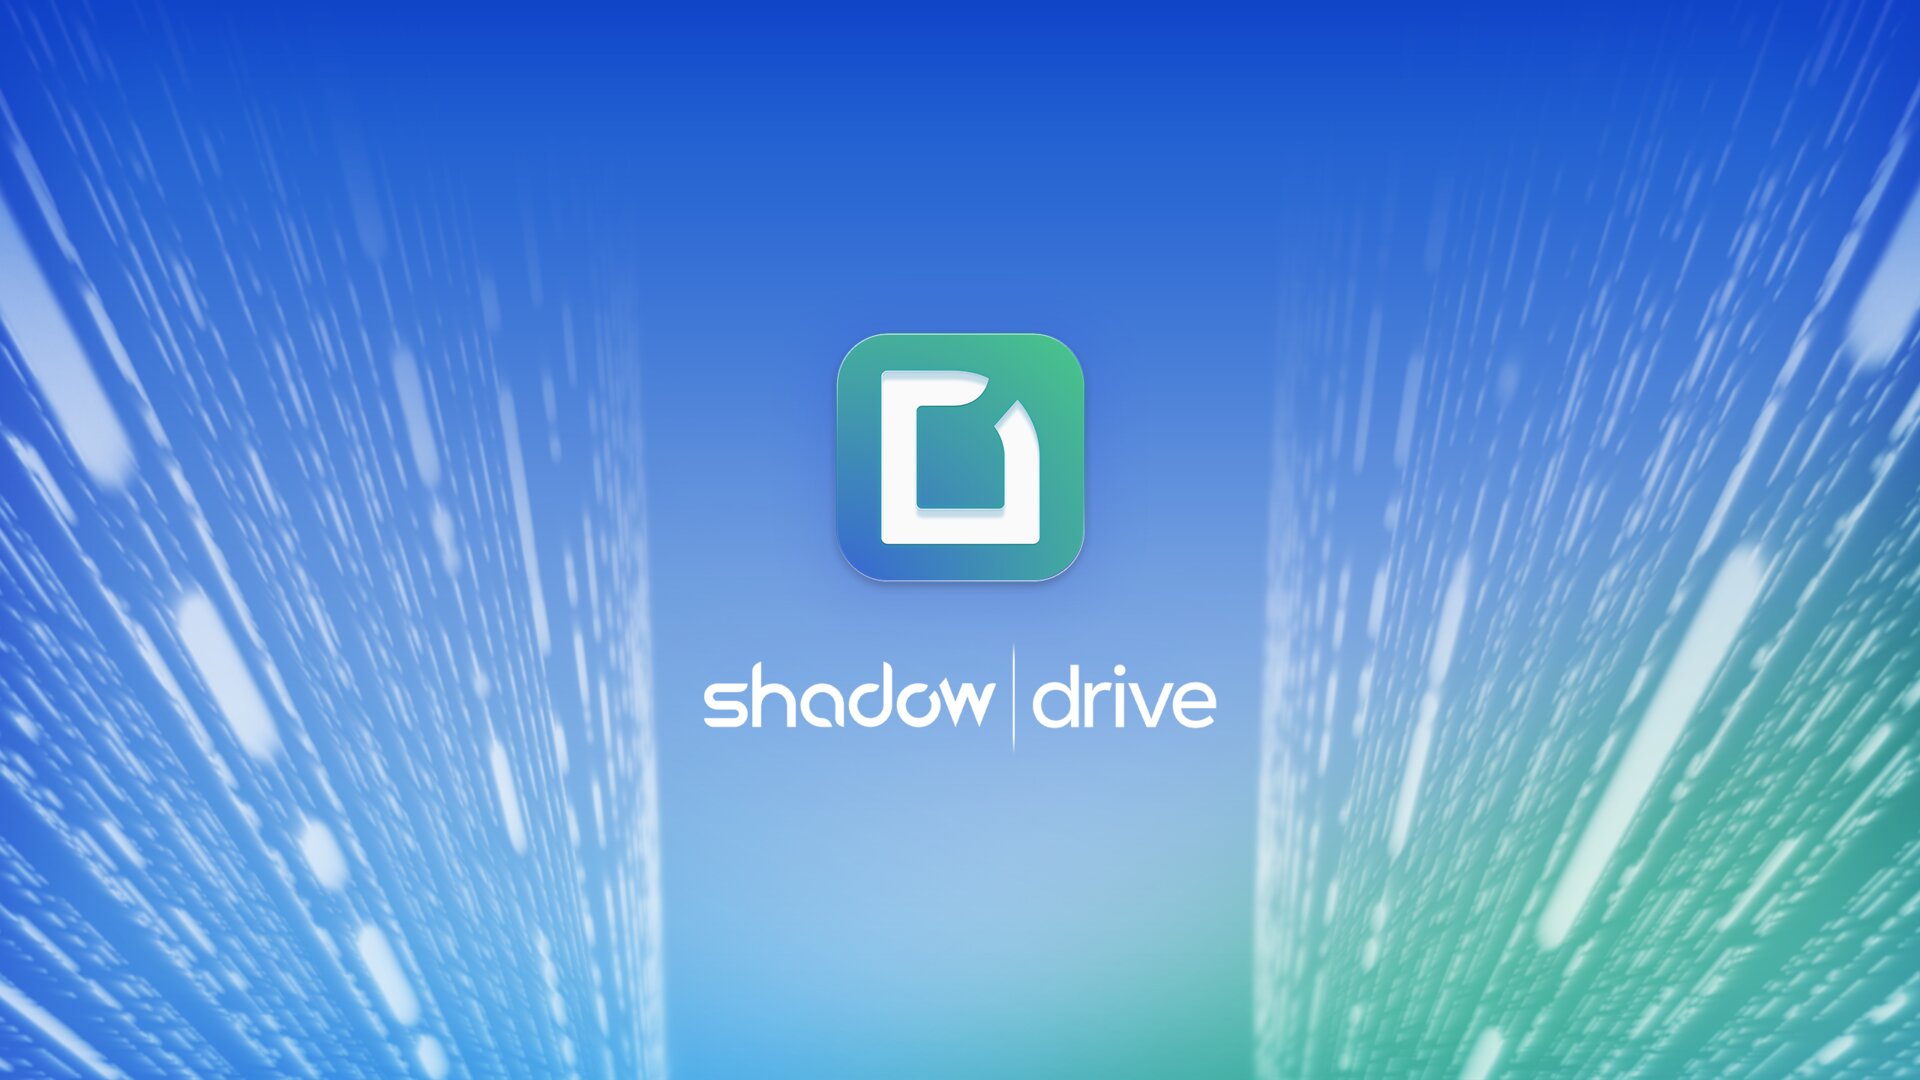 Shadow Drive: Secure Cloud Storage Launching This Fall